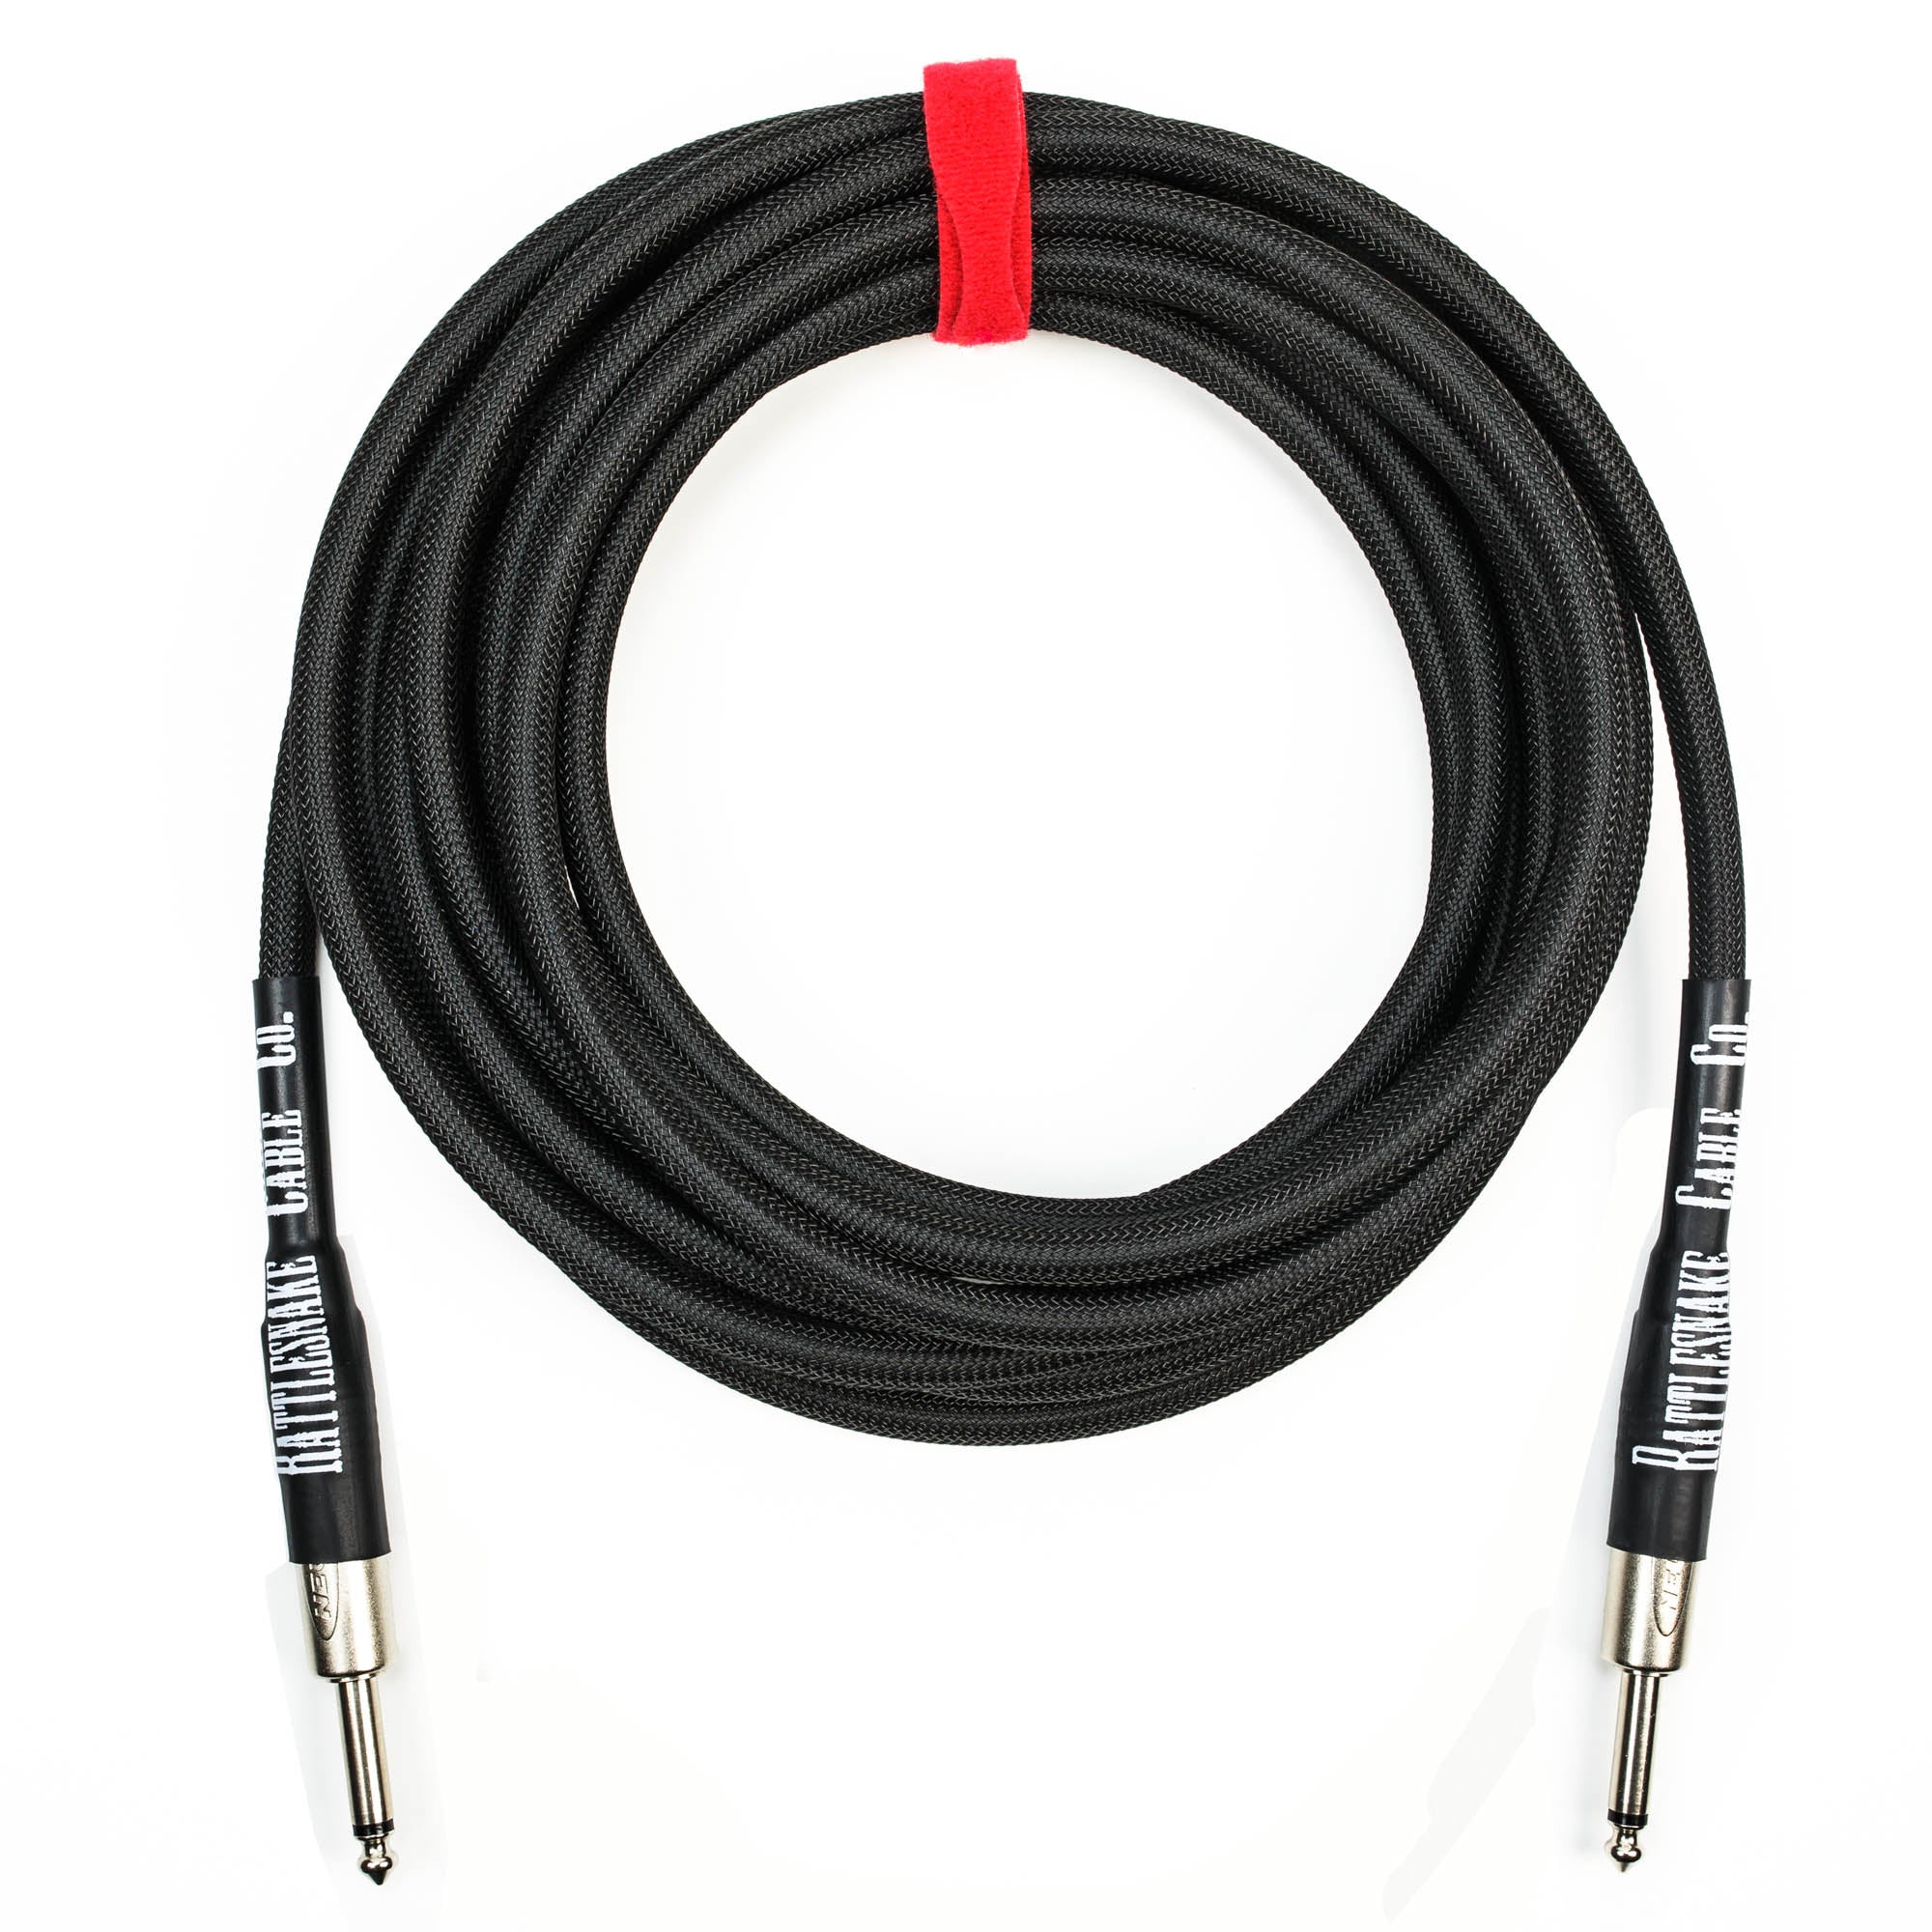 Rattlesnake Cable Company 20' Black Guitar Cable - Straight Plugs